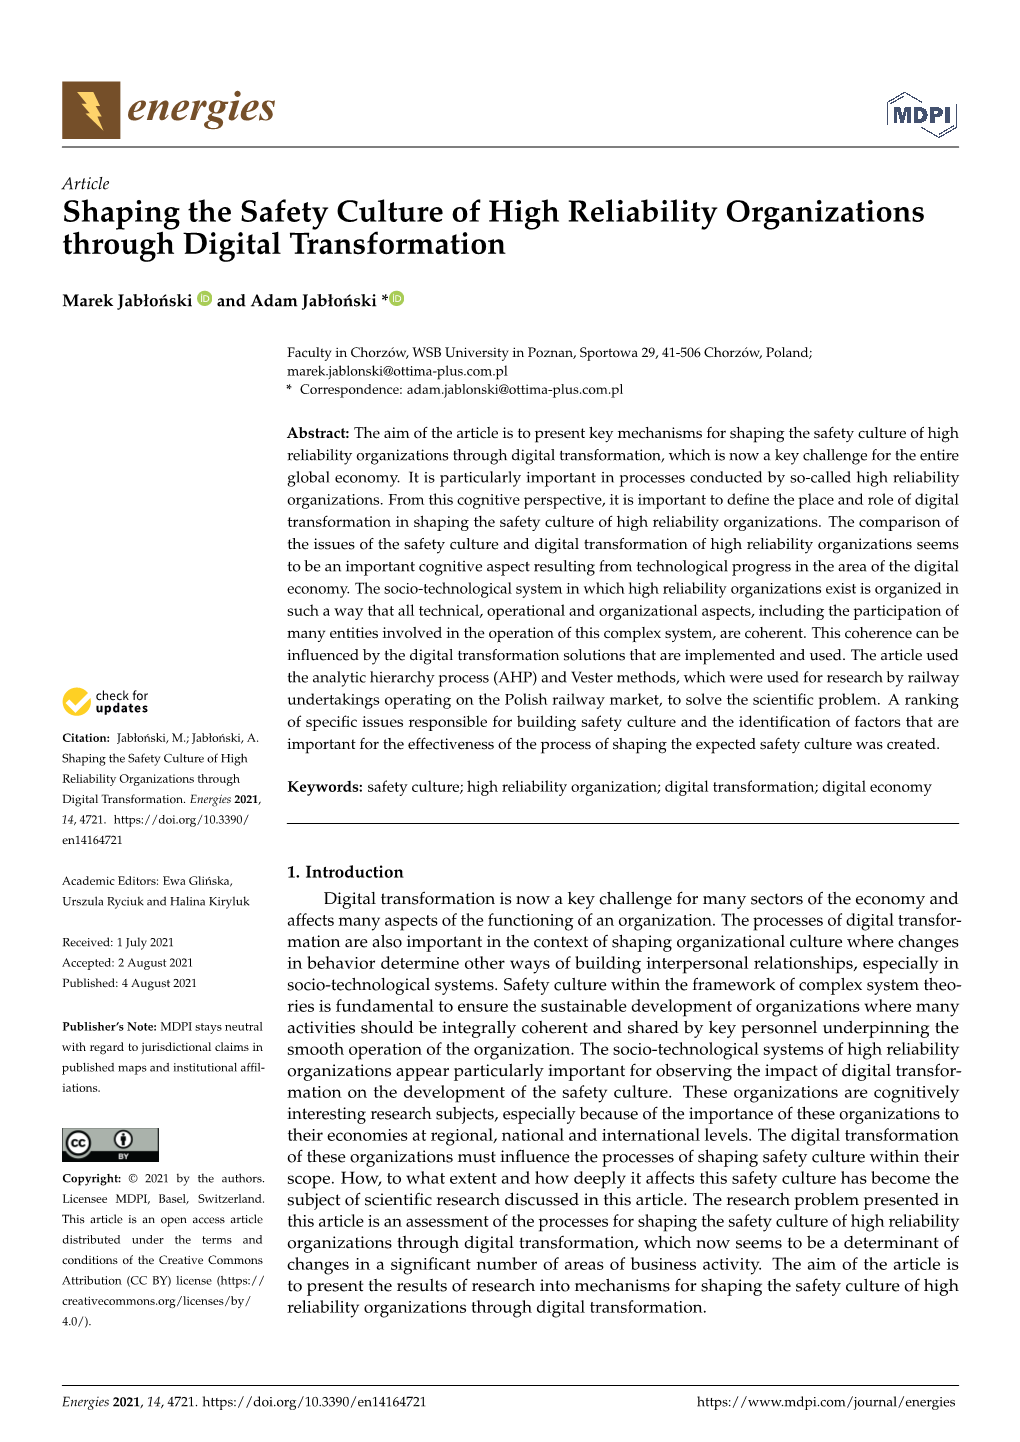 Shaping the Safety Culture of High Reliability Organizations Through Digital Transformation